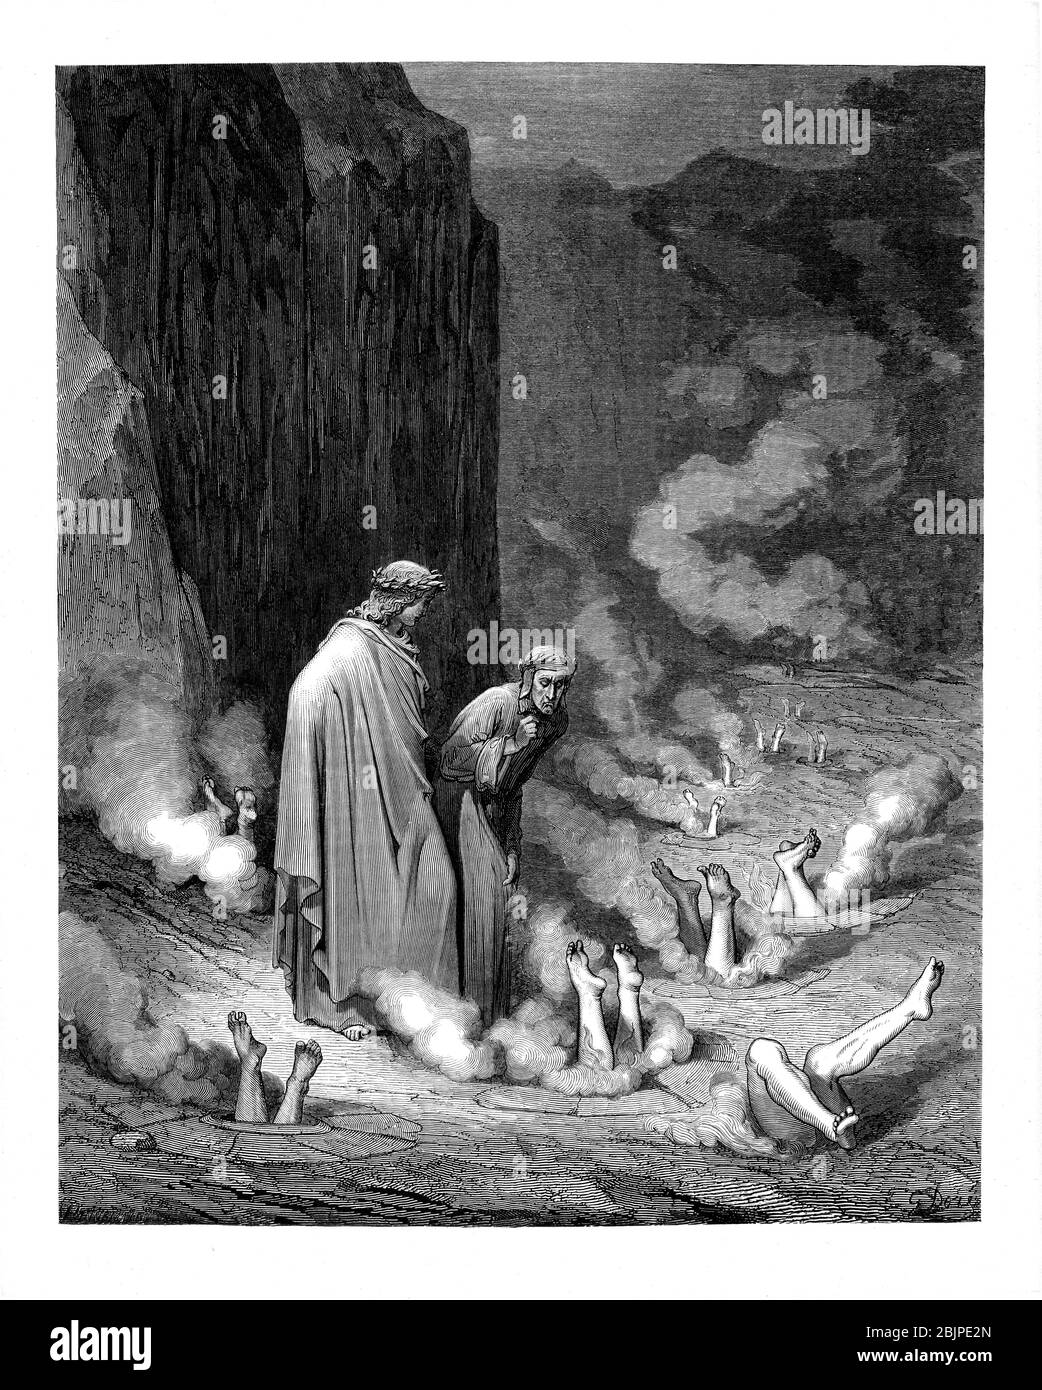 From the Divine Comedy by 14th century Italian poet Dante Alighieri. 1860 artwork, by French artist Gustave Dore and engraved by Stephane Pannemaker, from 'The Vision of Hell' (1868), Cary's English translation of the Inferno. Dante wrote his epic poem 'Divina Commedia' (The Divine Comedy) between 1308 and his death in 1321. Consisting of 14,233 lines, and divided into three parts (Inferno, Purgatorio, and Paradiso), it is considered the greatest literary work in the Italian language and a world masterpiece. It is a comprehensive survey of medieval theology, literature and thought. The new non Stock Photo